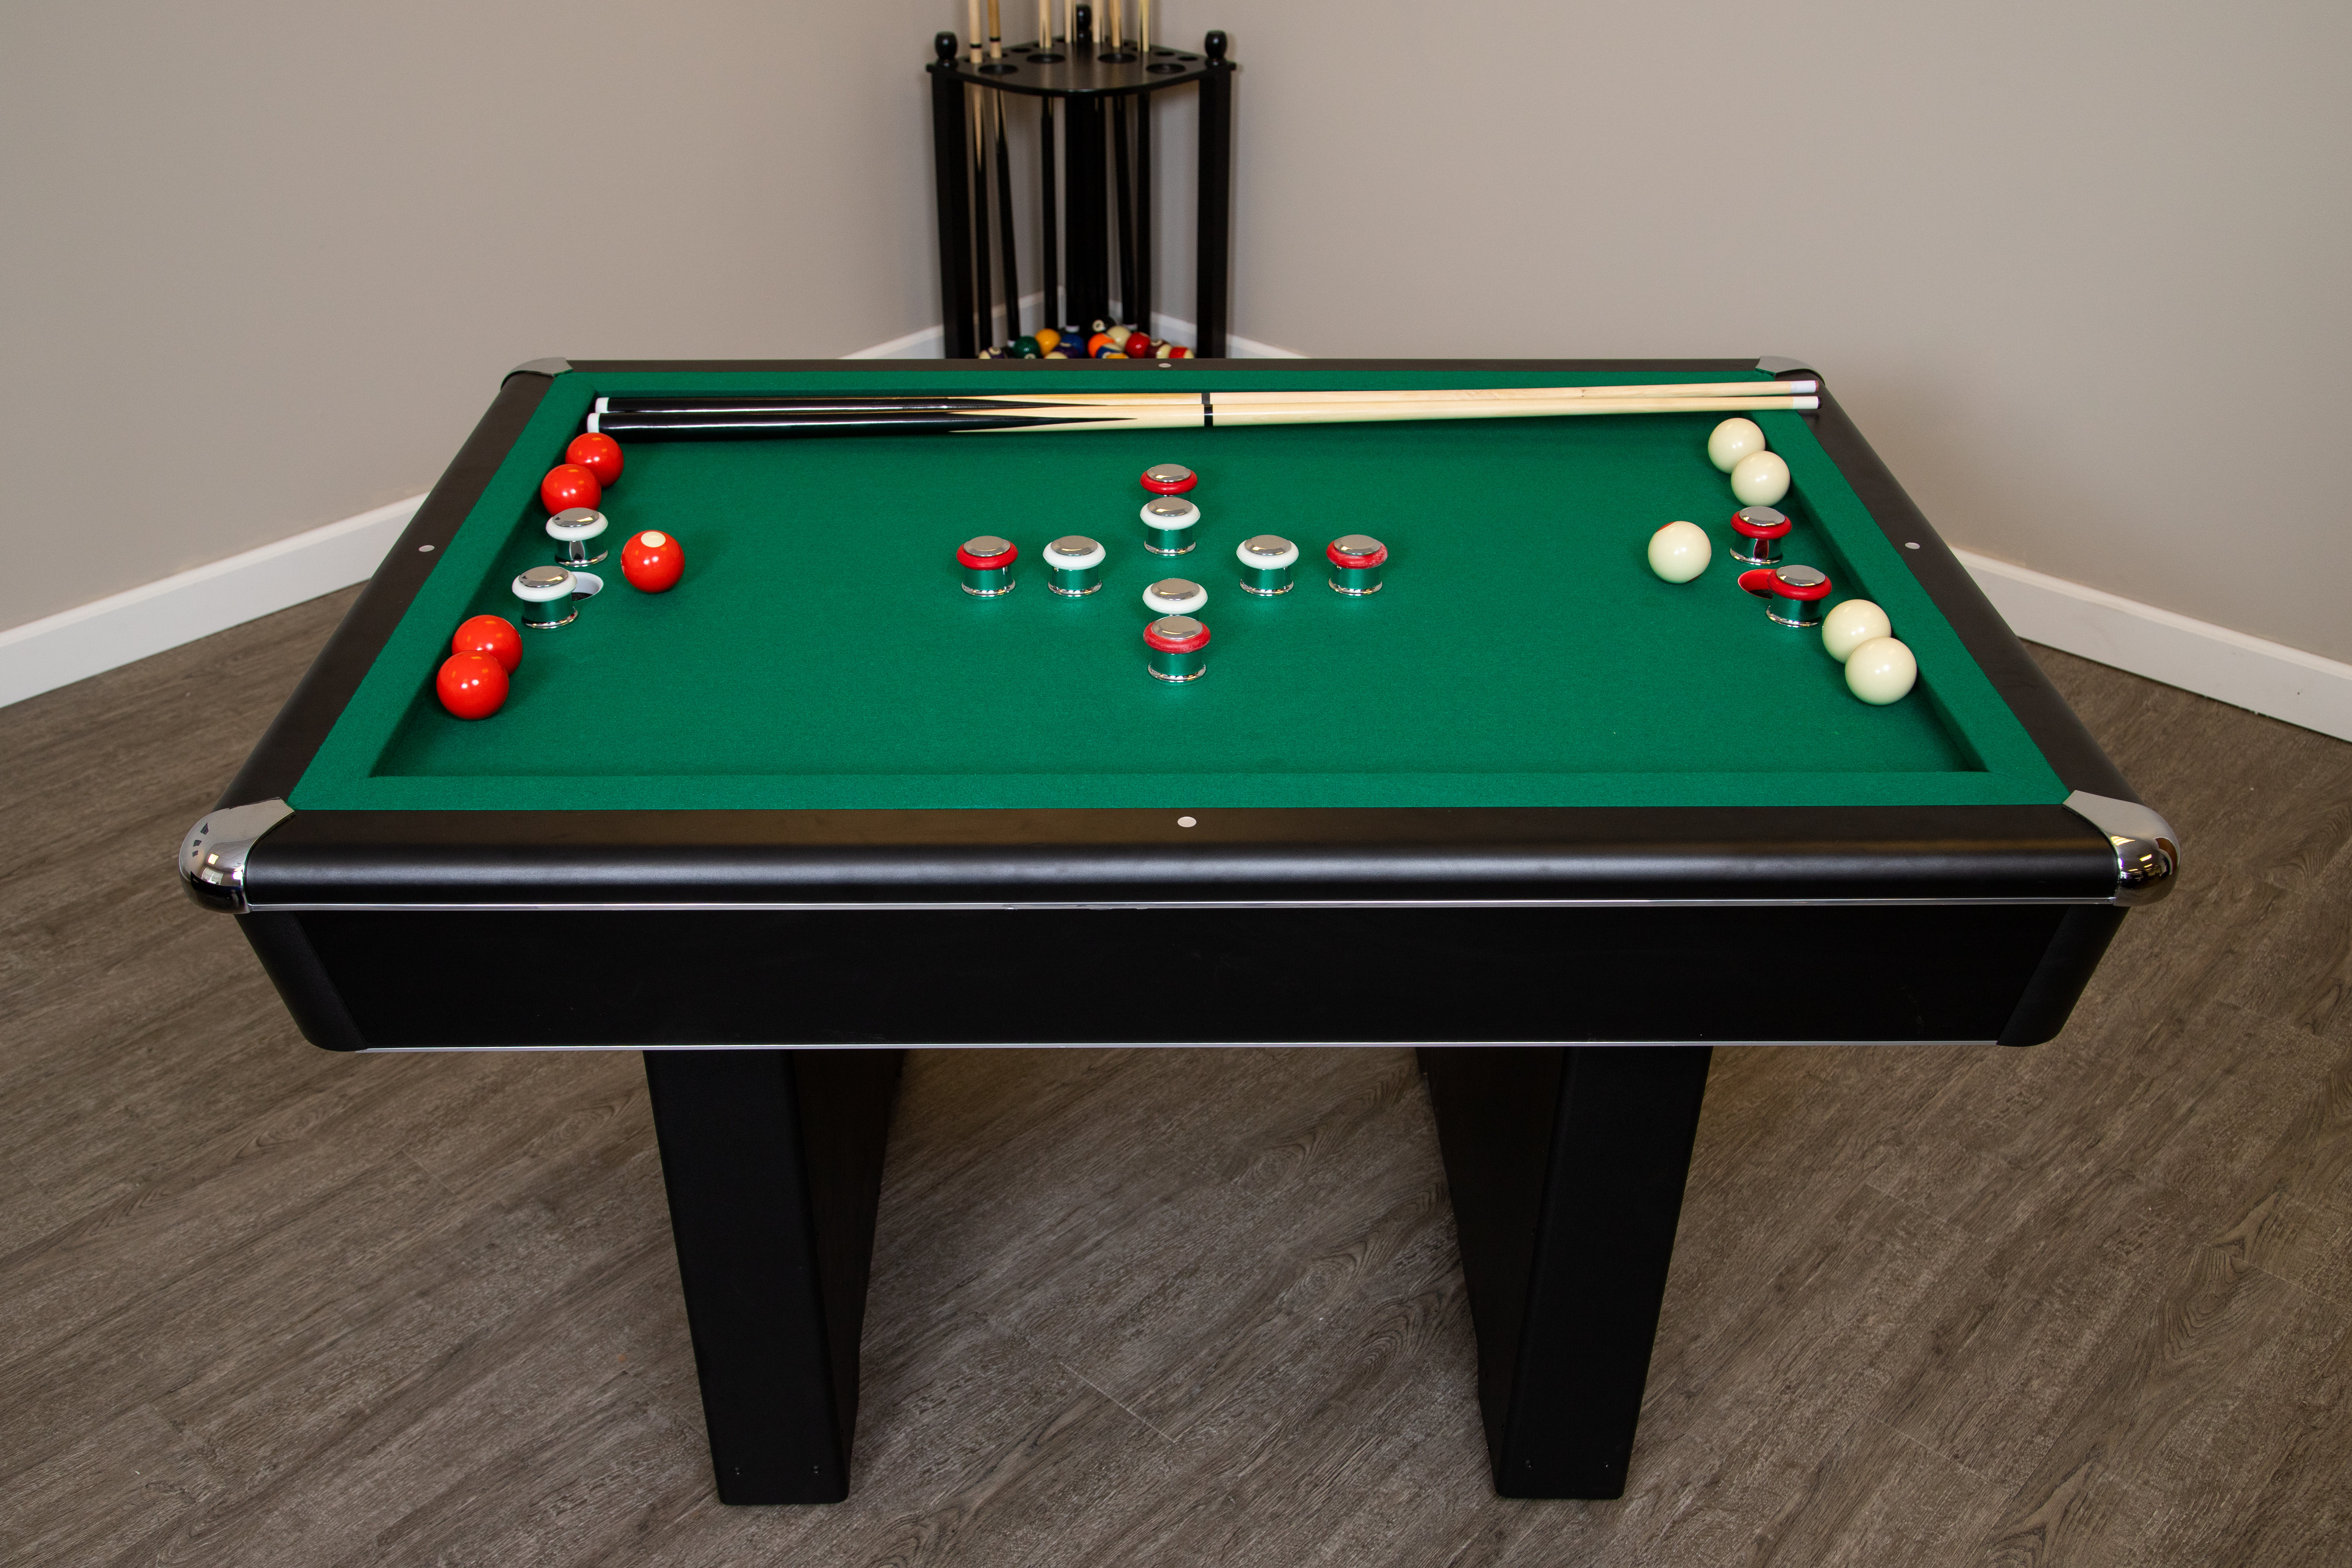 Get Your Game On with Stylish Billiards Accessories